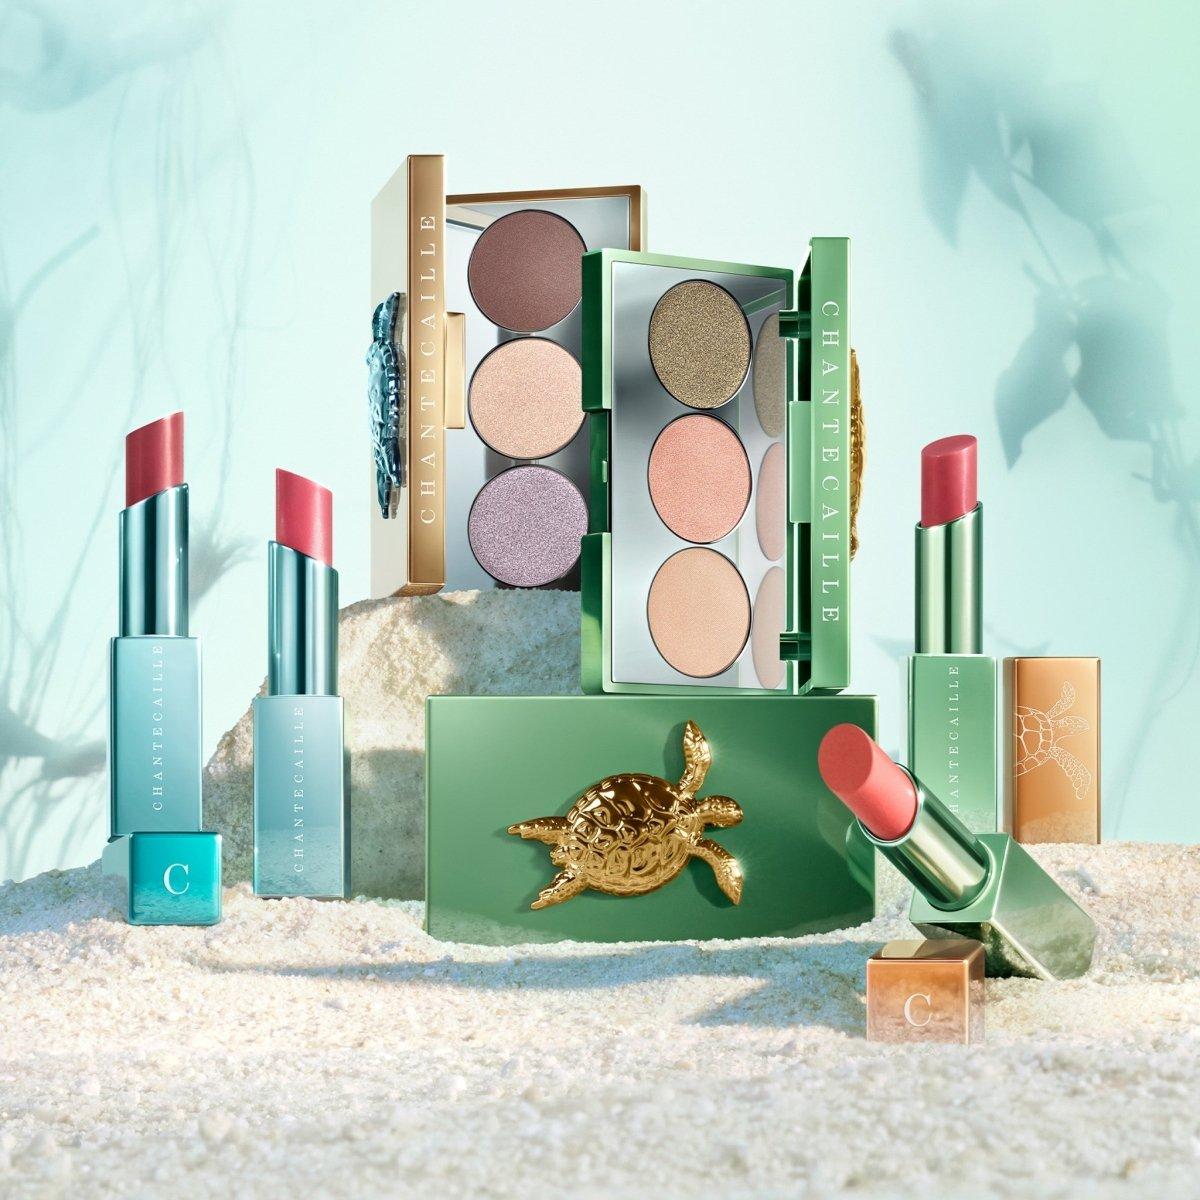 Sea Turtle Collection Lip Chic (Limited Edition) - Glam Global UK